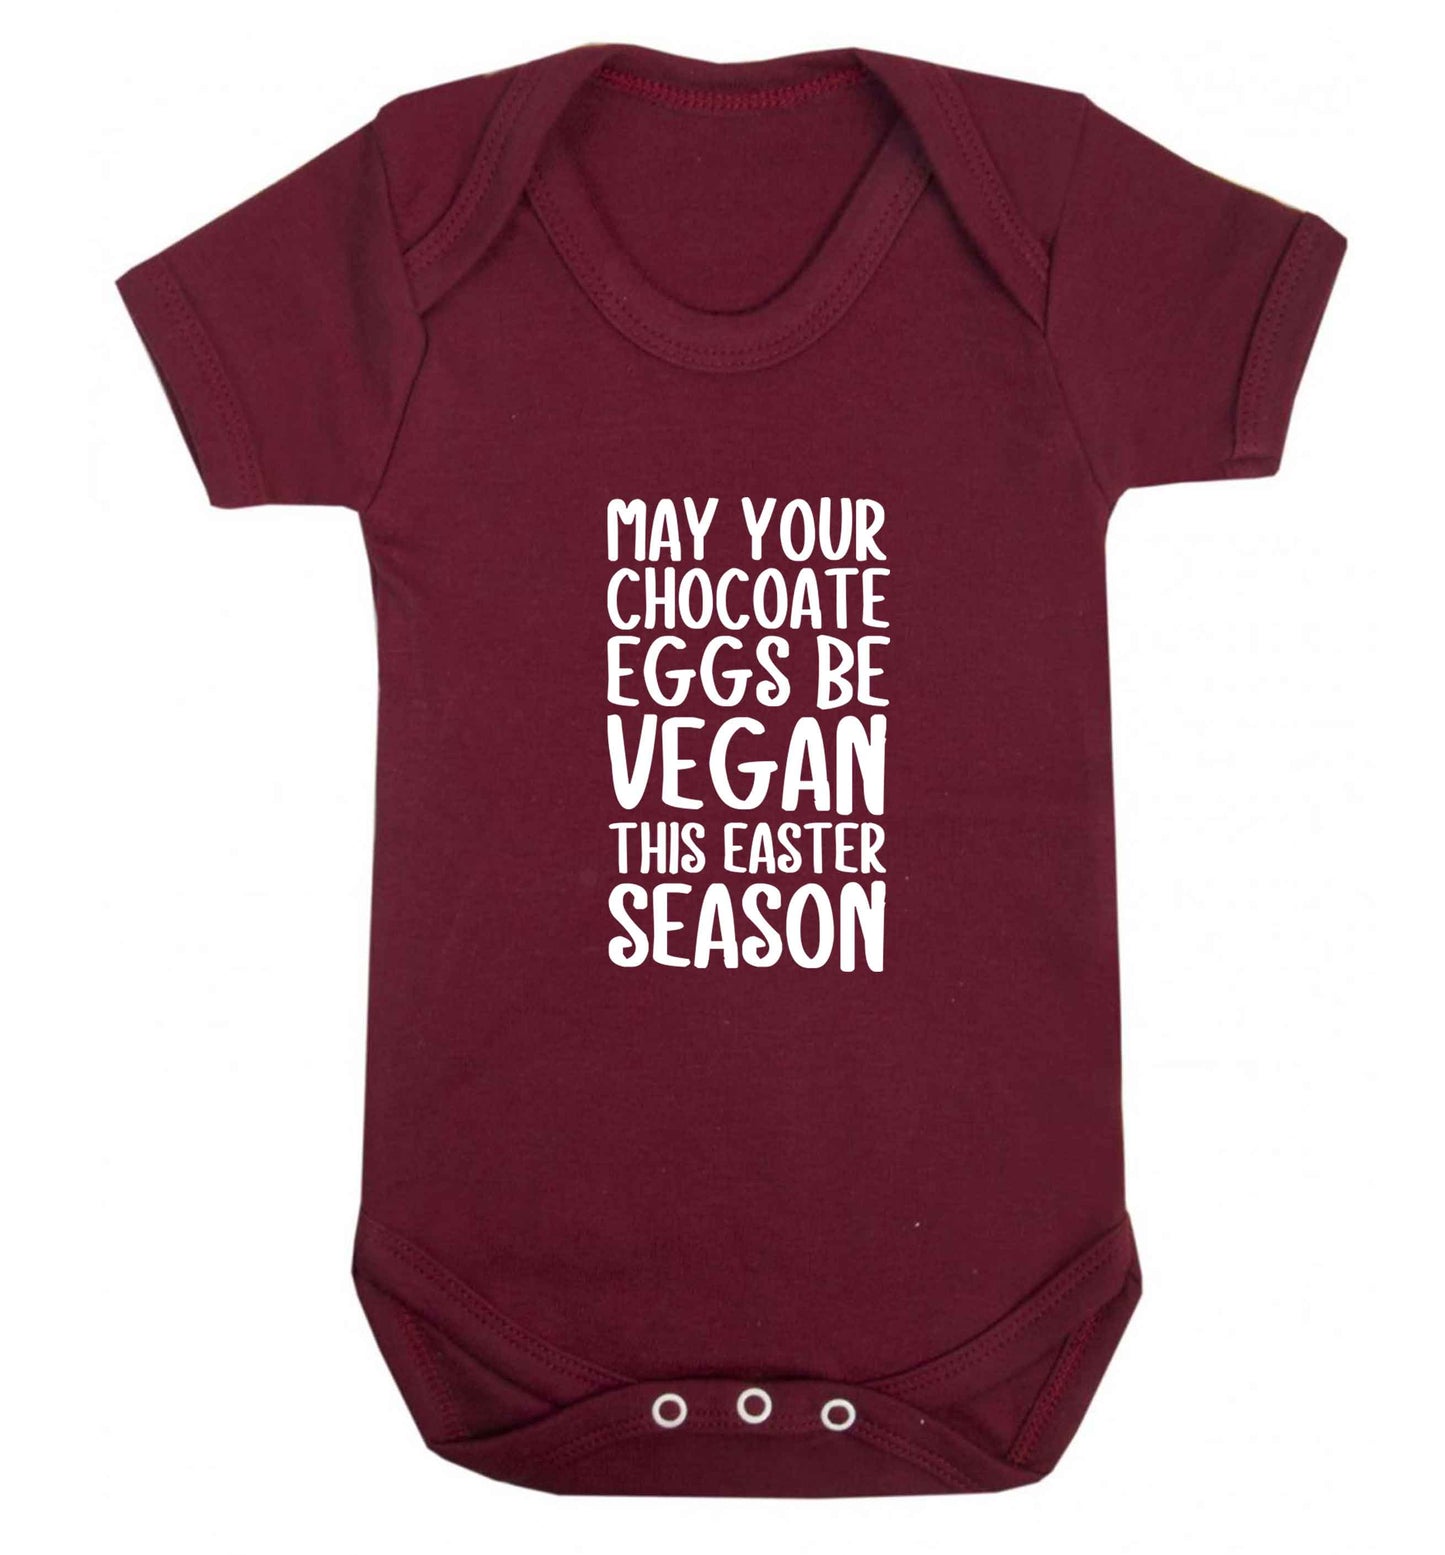 Easter bunny approved! Vegans will love this easter themed baby vest maroon 18-24 months